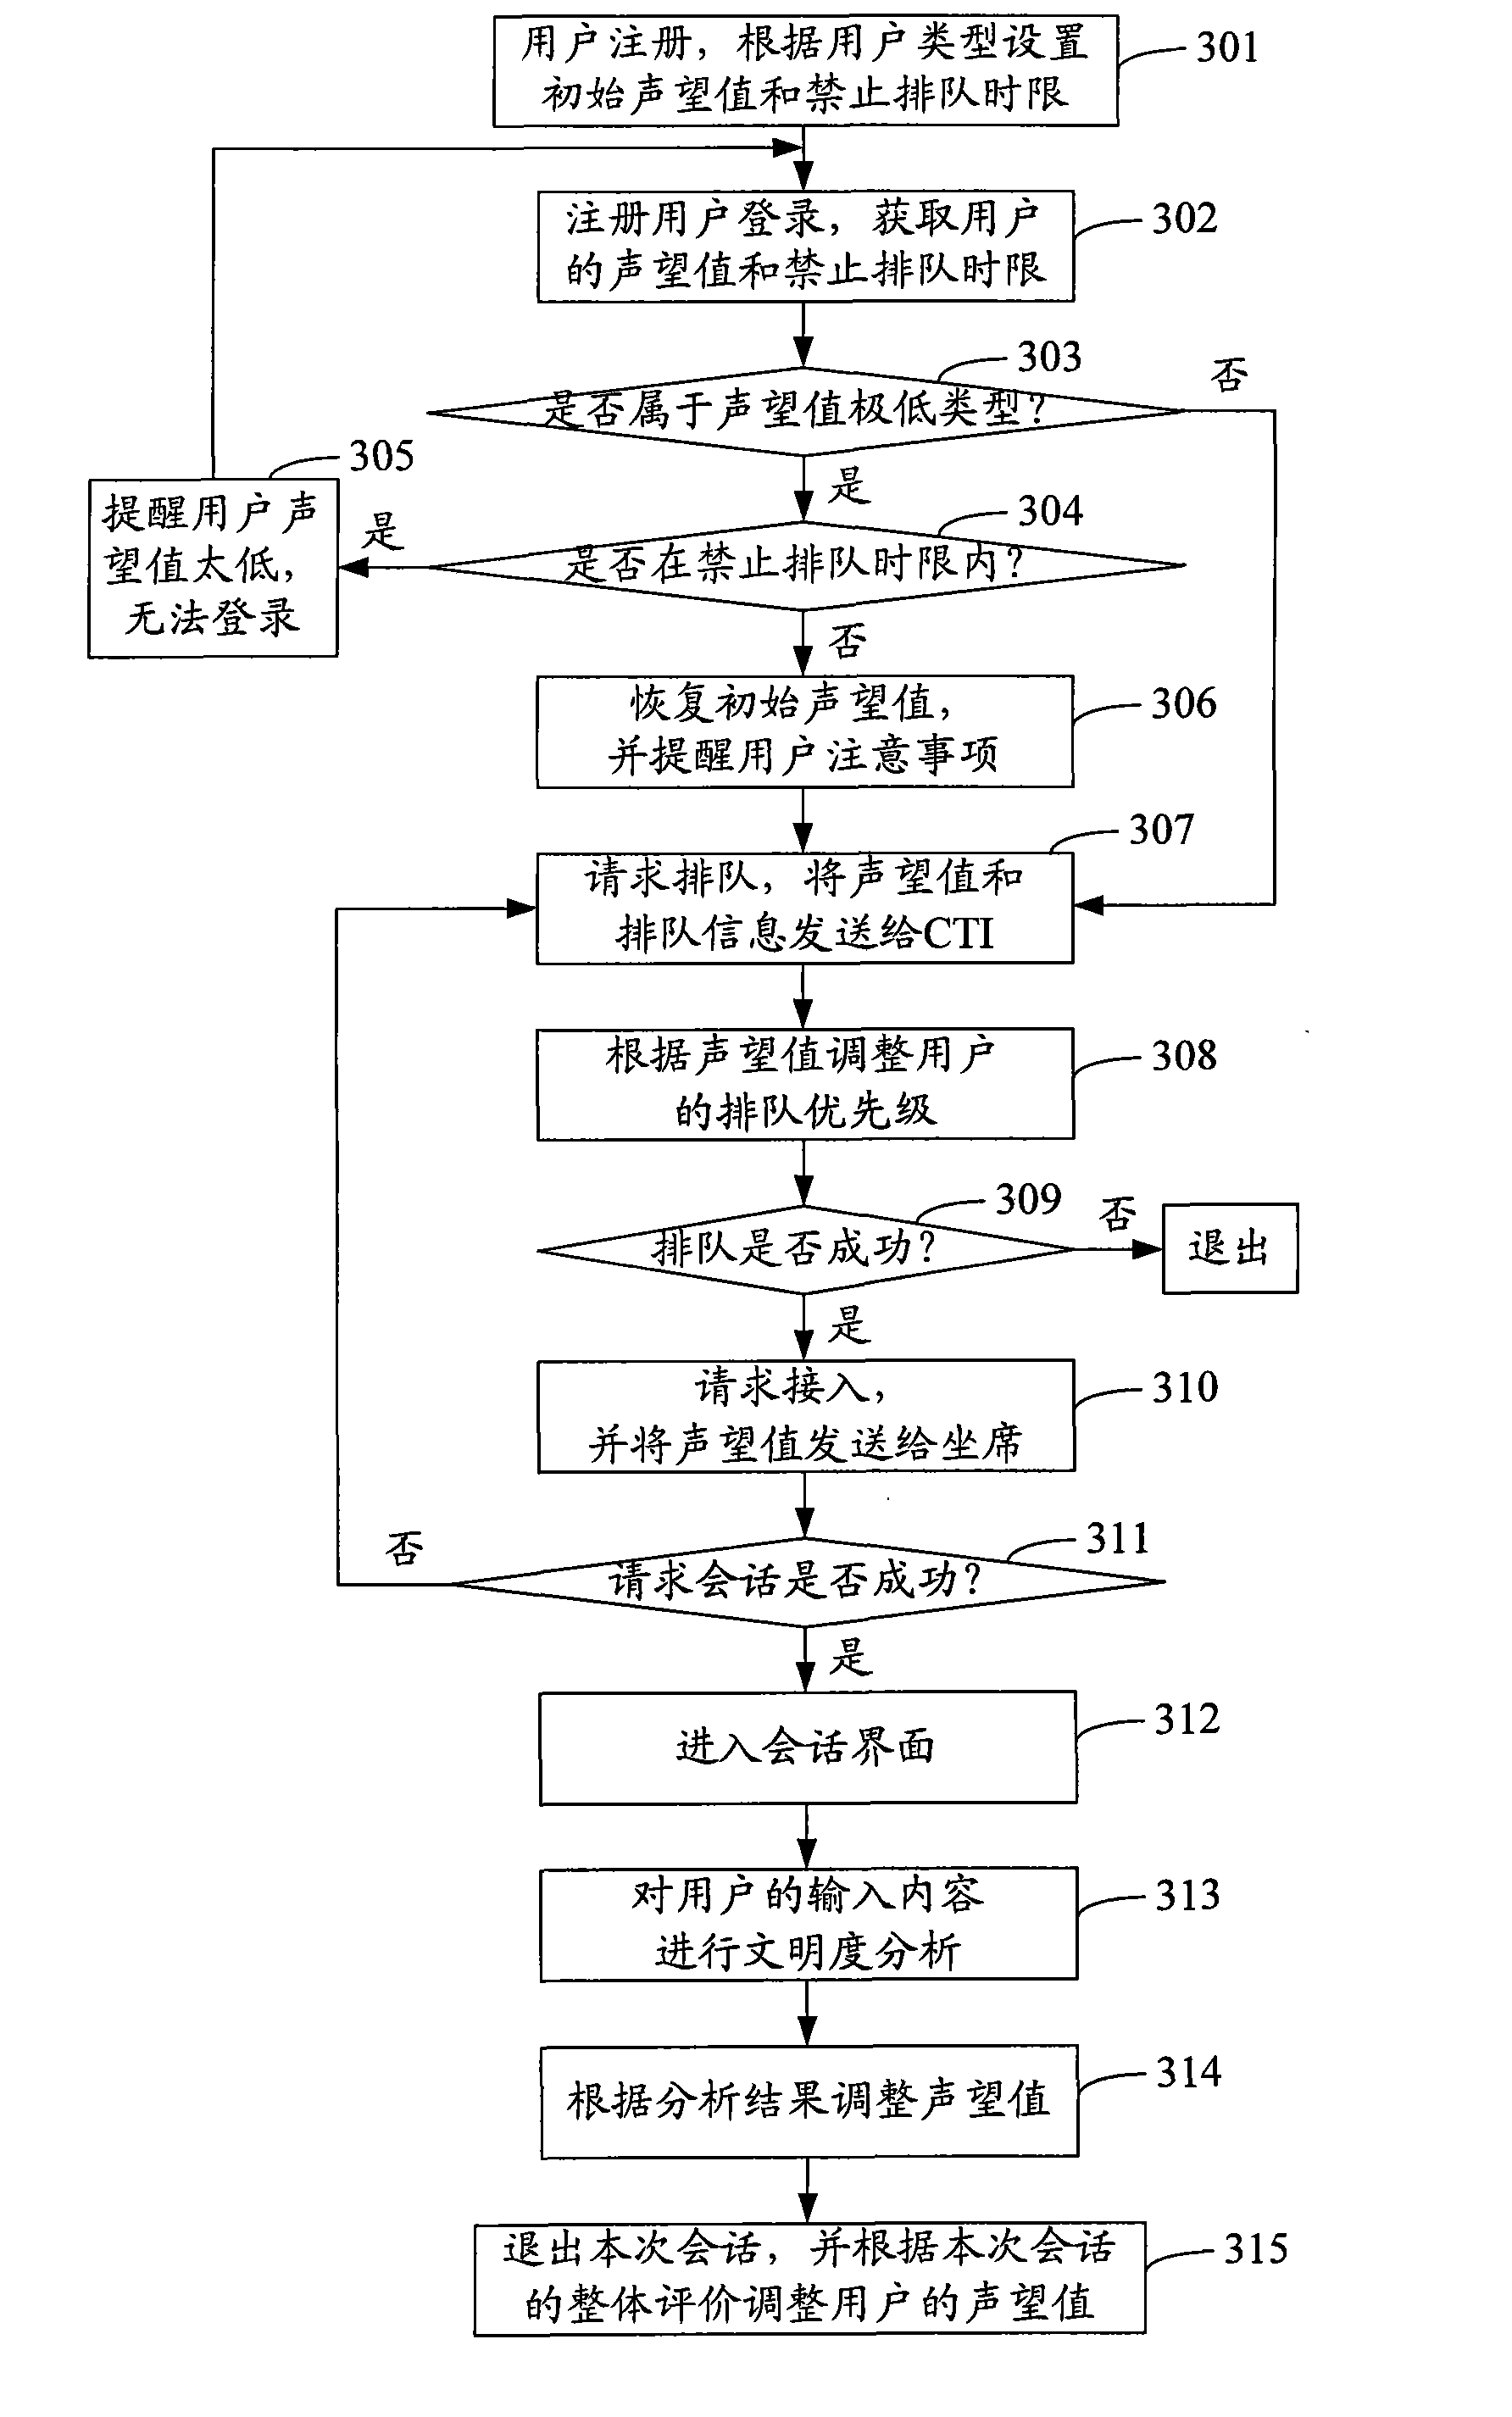 Method and system for dynamically adjusting Internet user access priority